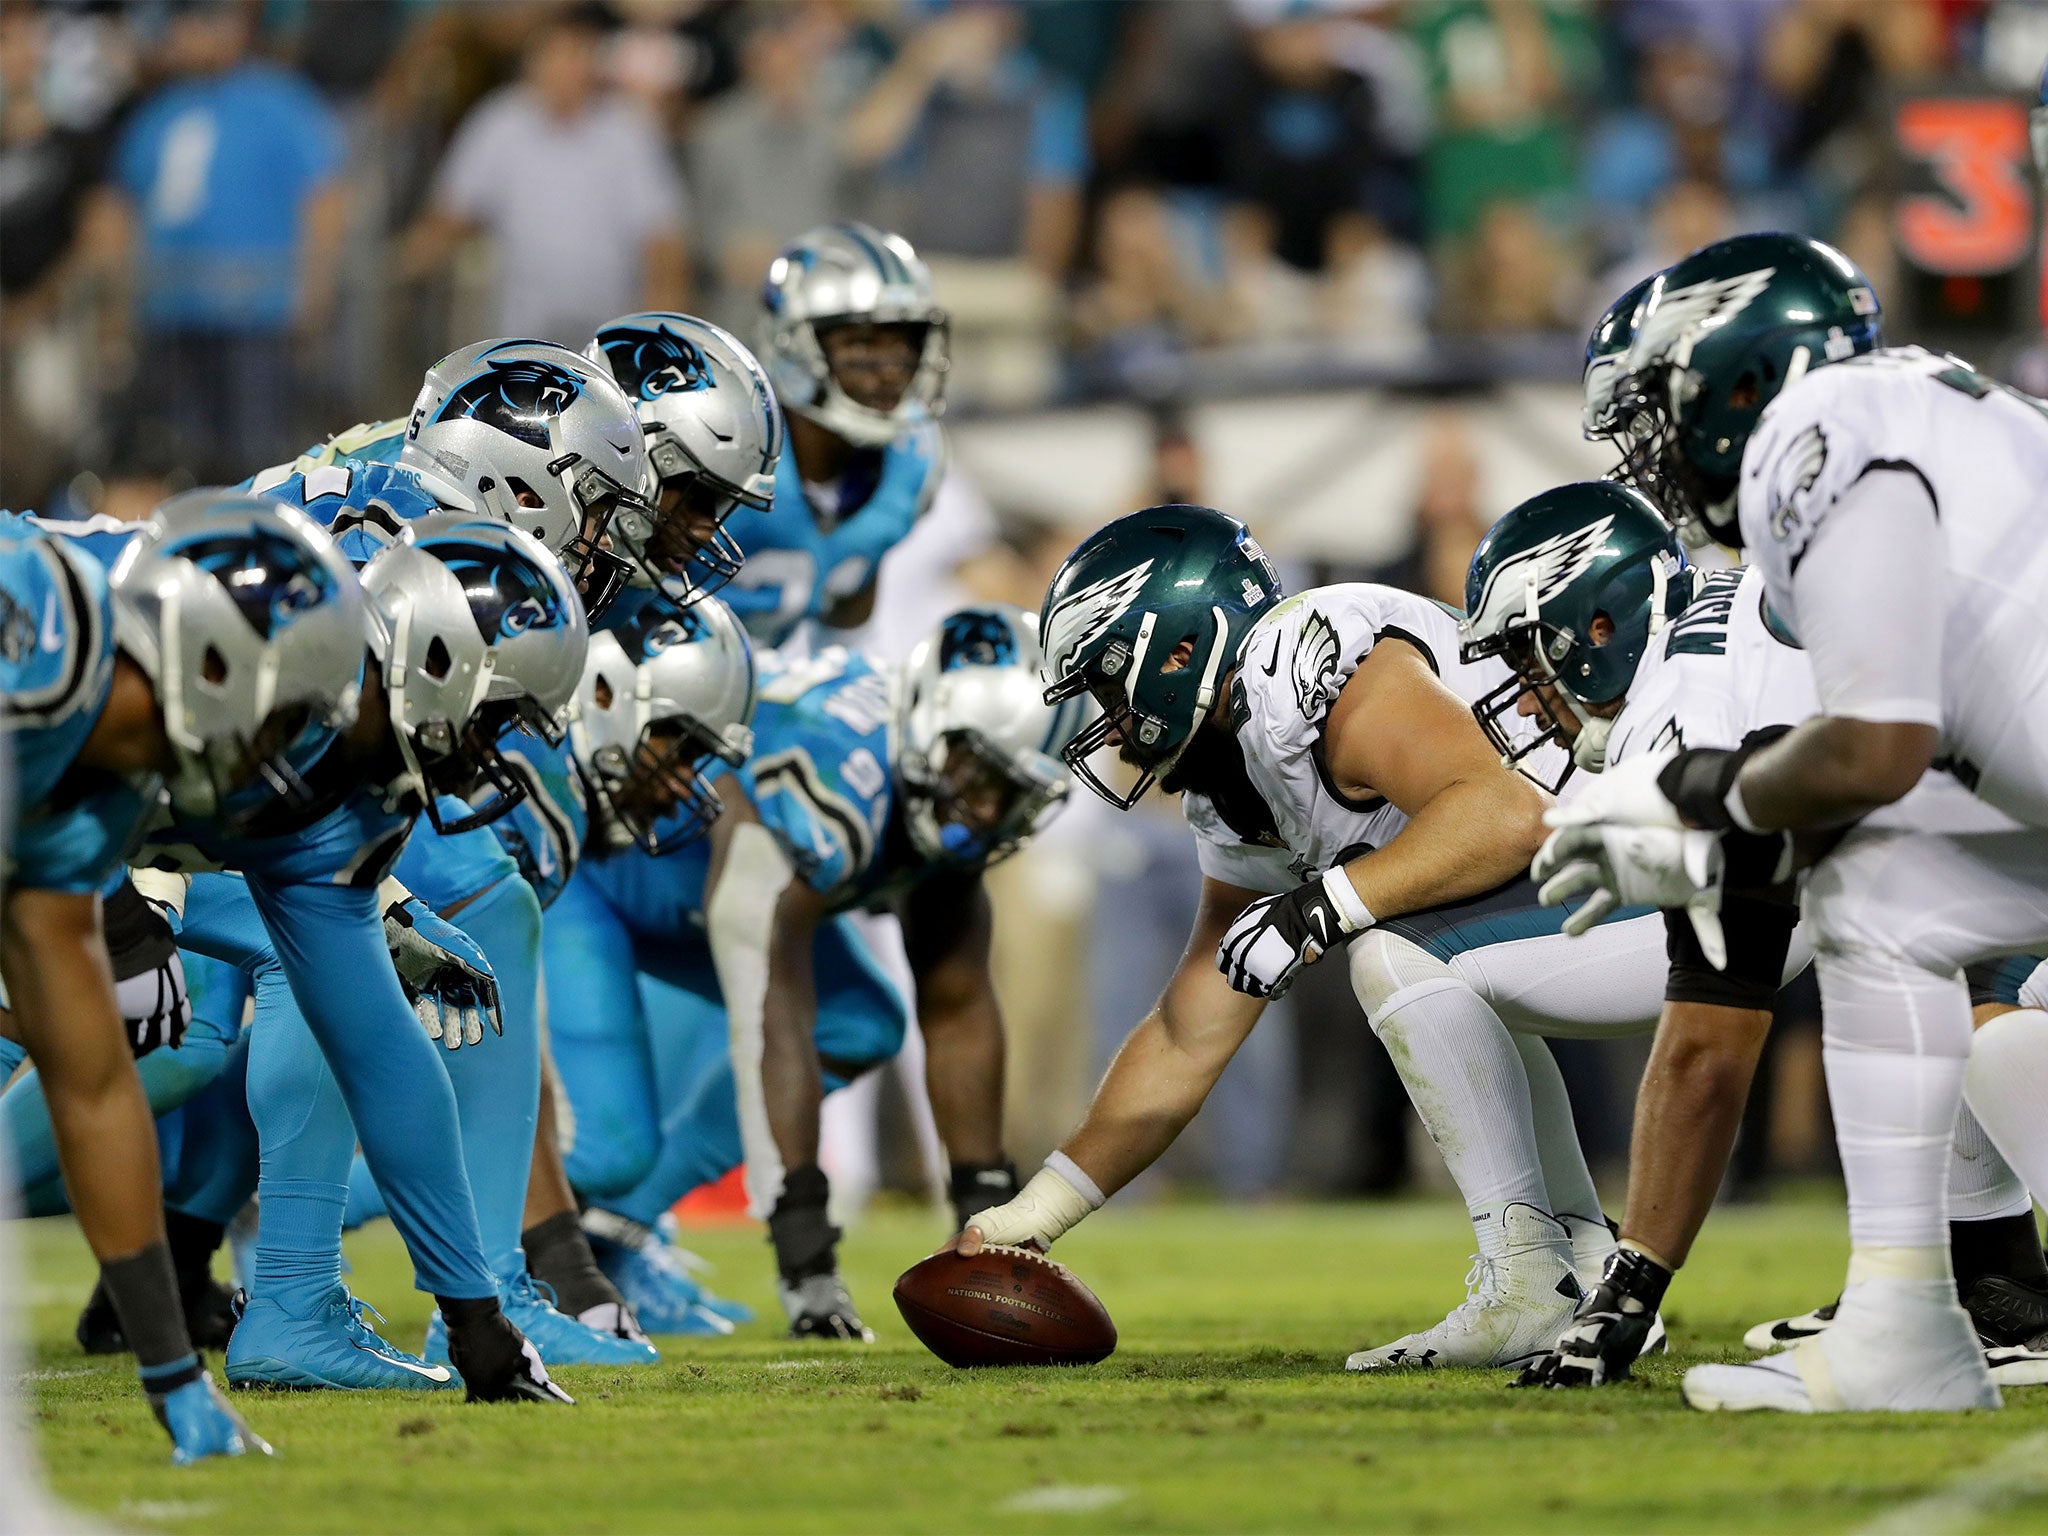 The Carolina Panthers were beaten up front by the Eagles